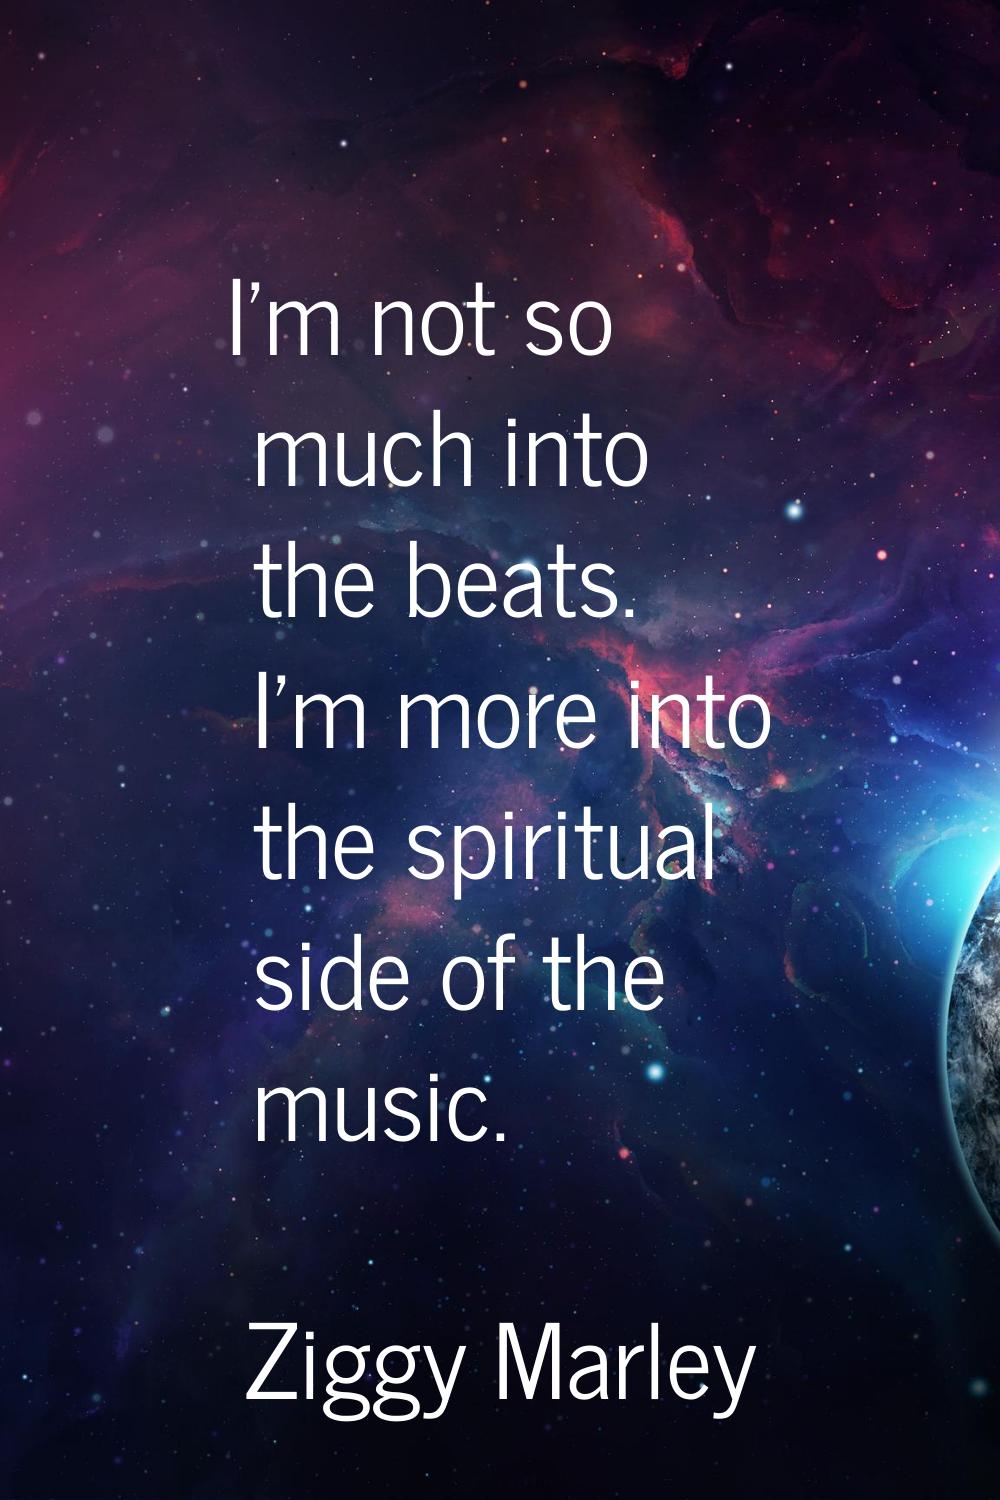 I'm not so much into the beats. I'm more into the spiritual side of the music.